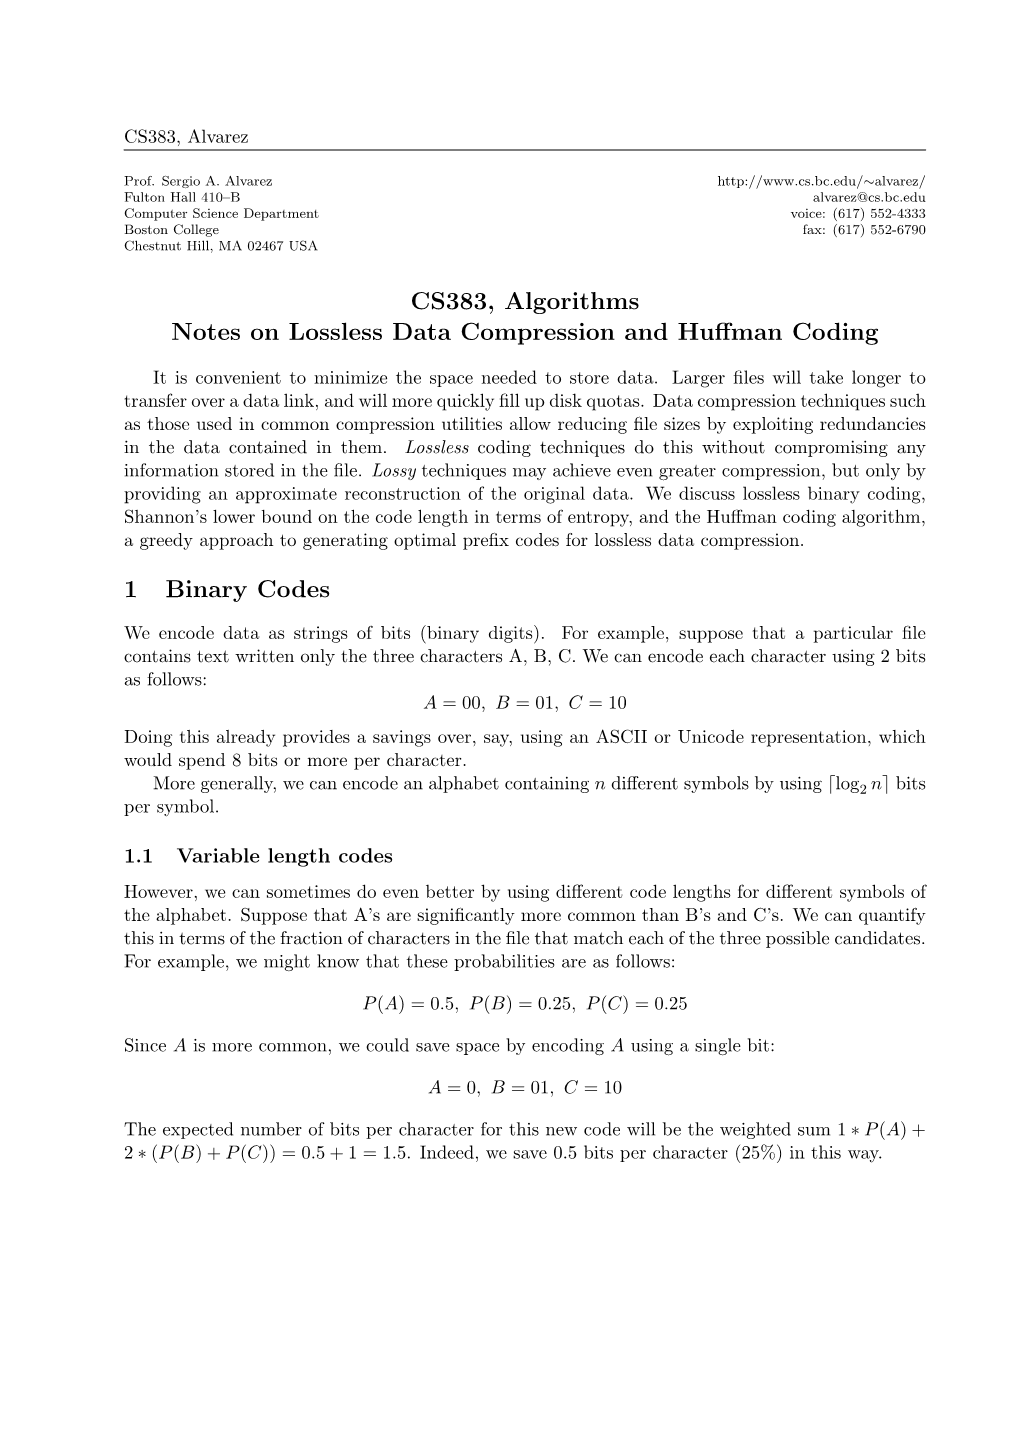 CS383, Algorithms Notes on Lossless Data Compression and Huffman